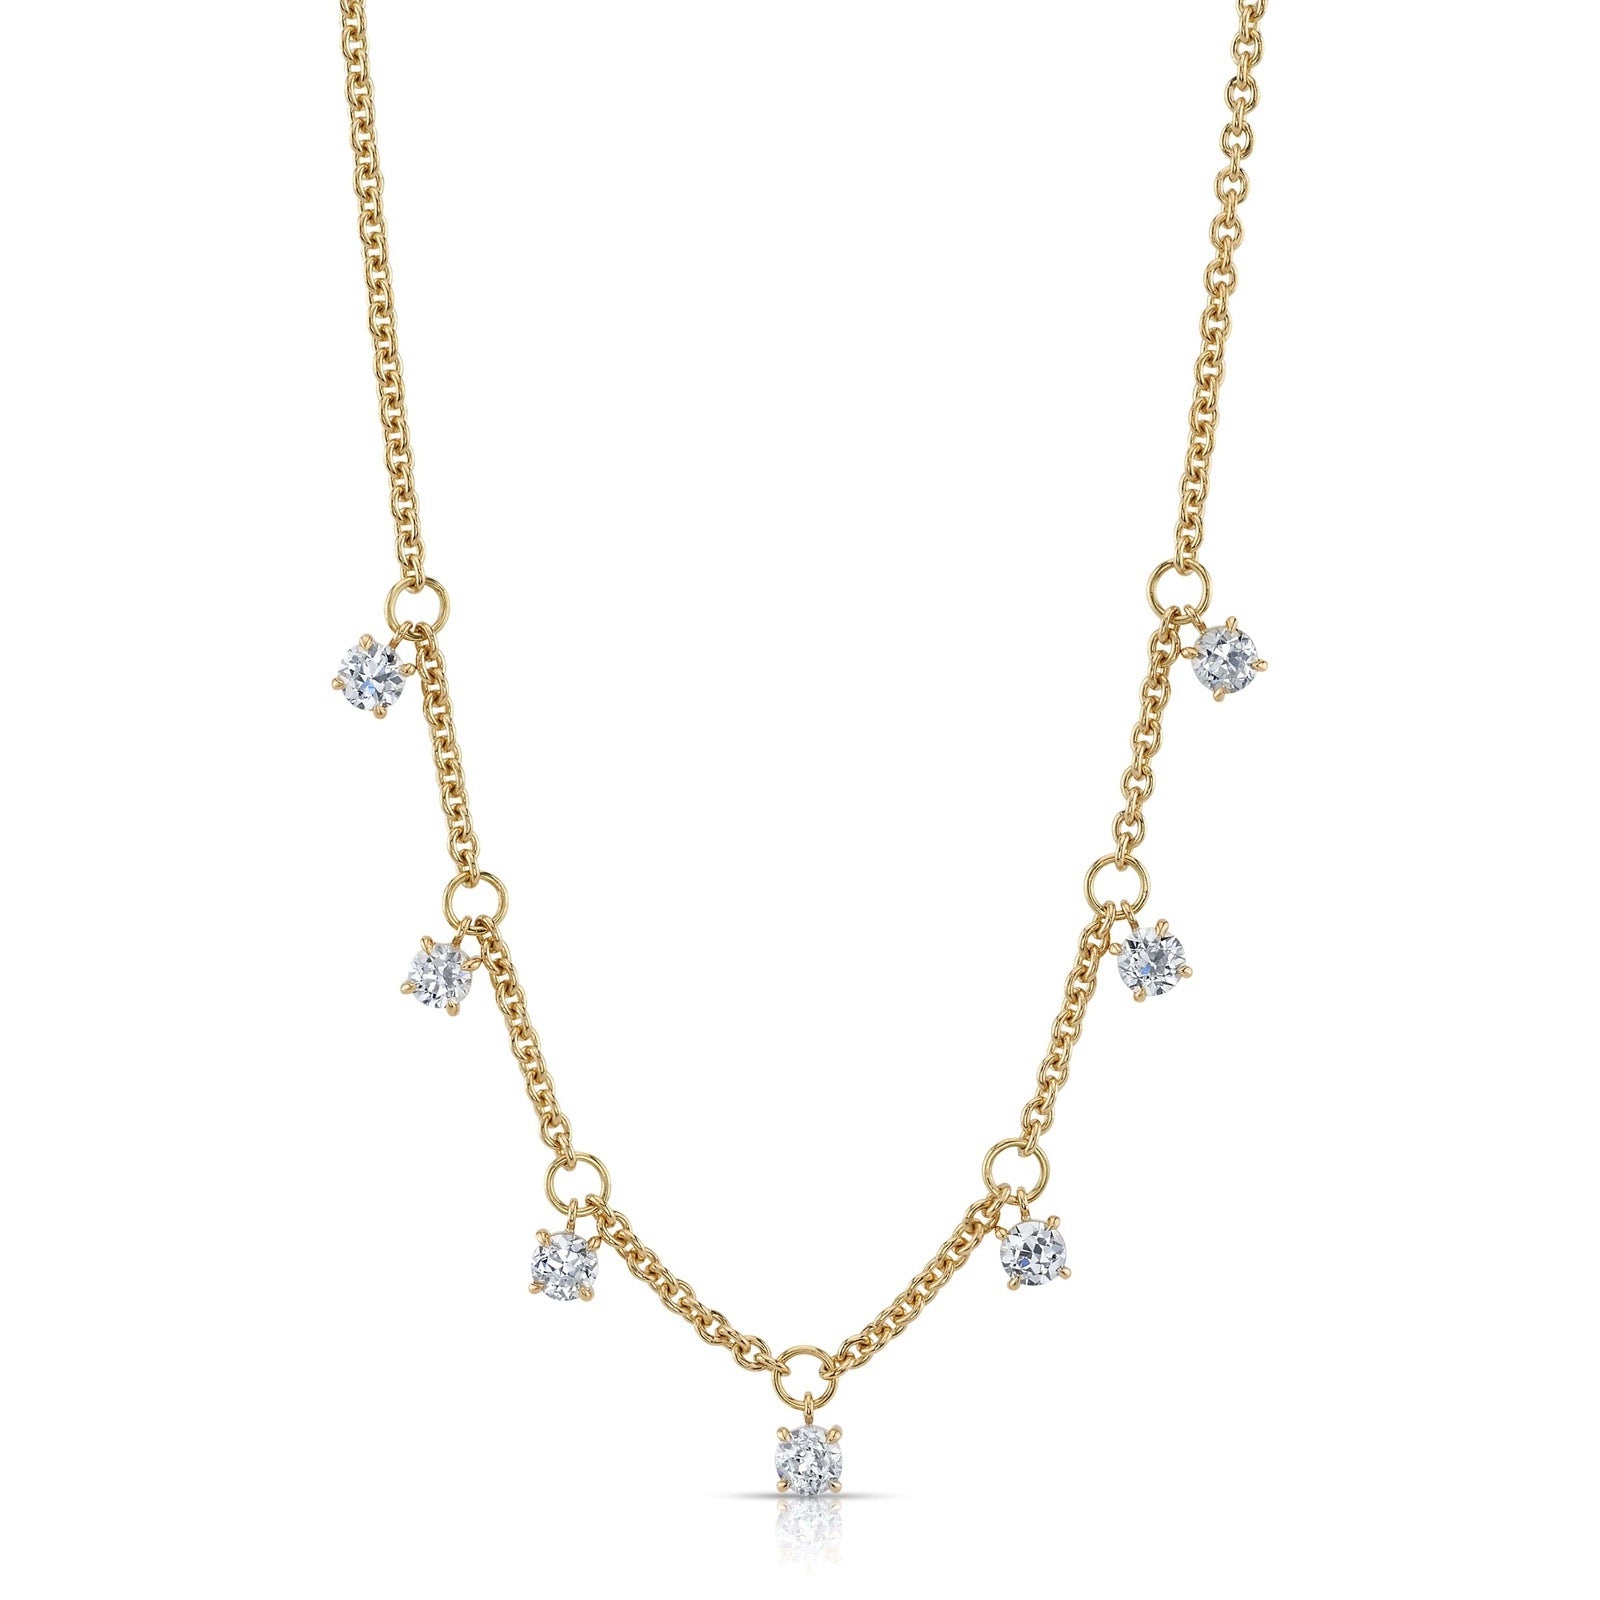 SINGLE STONE JAYLEN NECKLACE featuring Approximately 2.75ctw I-K/VS2-SI2 old European cut diamonds prong set on a handcrafted 17" 18K yellow gold chain.